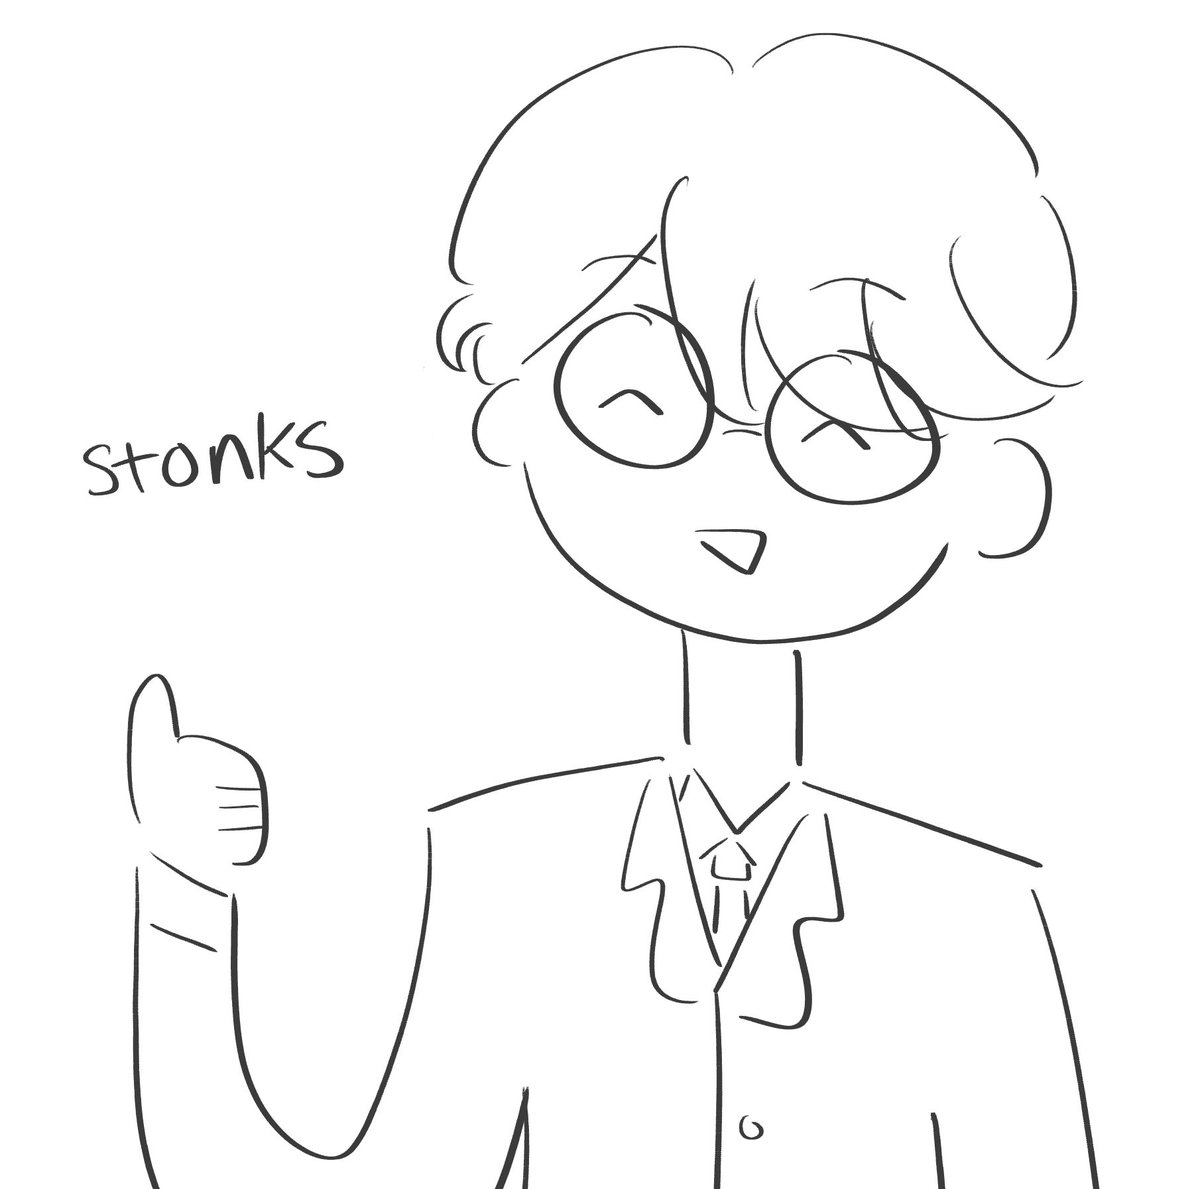 24) i have drawn many chikages in my day. but none compare to Stonks Chikage